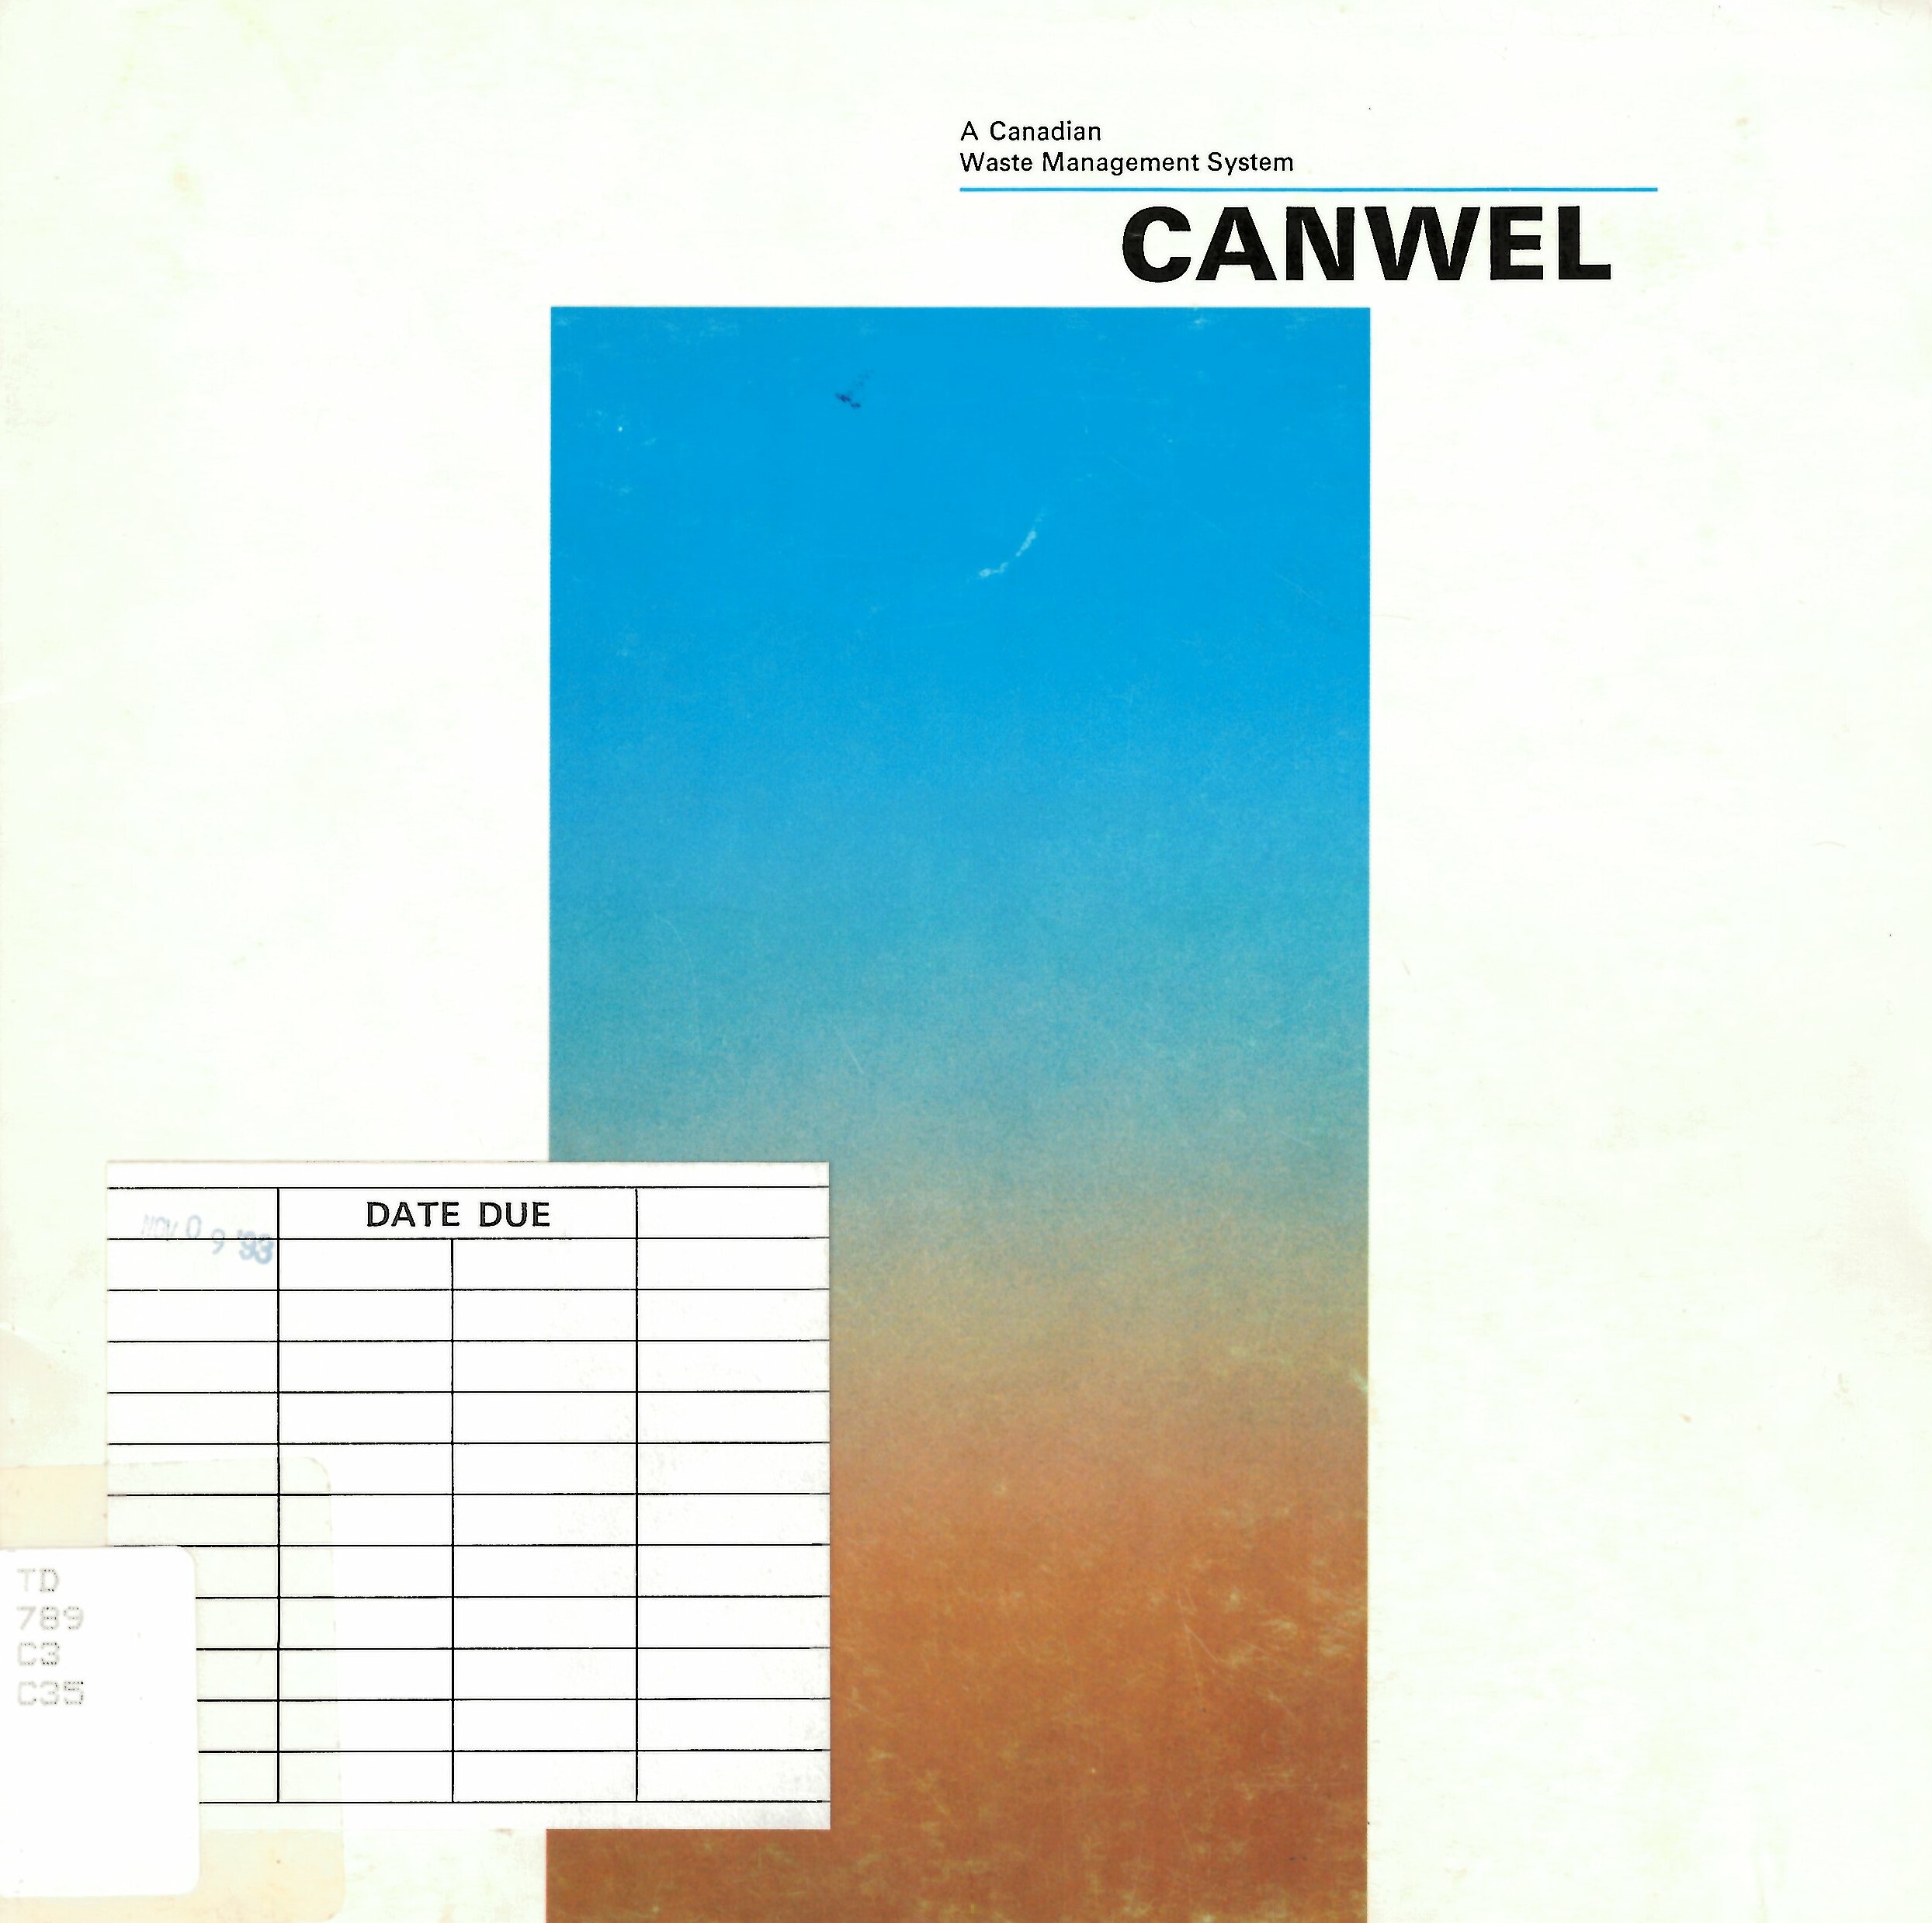 CANWEL: a Canadian waste management system